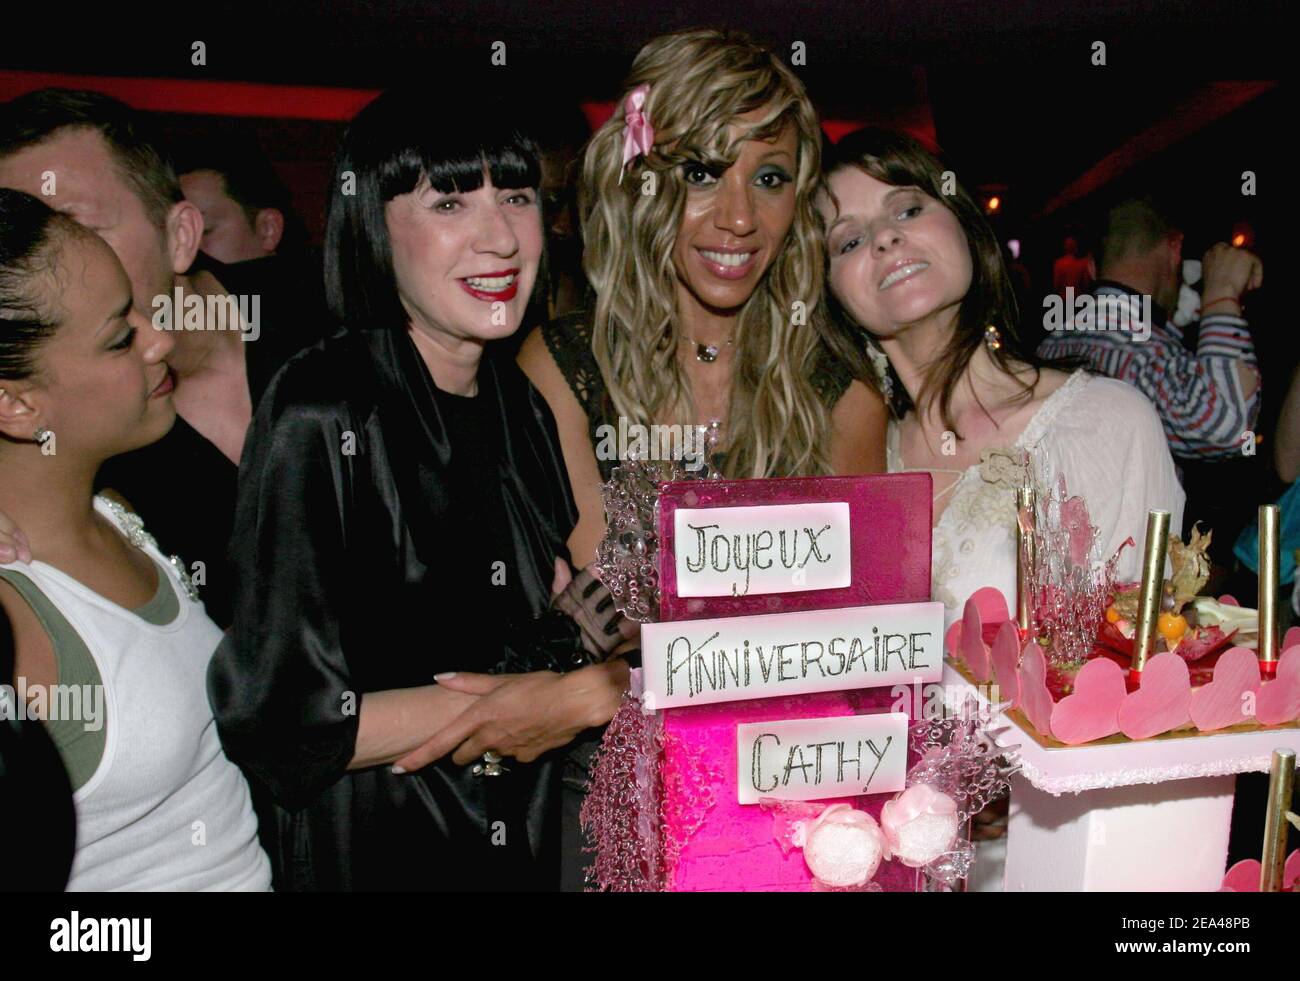 Night club owner Cathy Guetta poses with (L-R) singer Amel Bent, fashion designers Chantal Thomass and Lolita Lempicka as she celebrates her birthday at 'La Suite' in Paris, France, on June 2, 2005. Among the guests, U.S. actor Don Johnson, Florent Pagny, Noemie Lenoir, Emma de Caunes, Bernard Montiel, Chantal Thomass, Lolita Lempicka, Faudel, Yamina Benguigui, Henri Leconte, Severine Ferrer, Emilie Dequenne, Amel Bent. Photo by Benoit Pinguet/ABACA. Stock Photo